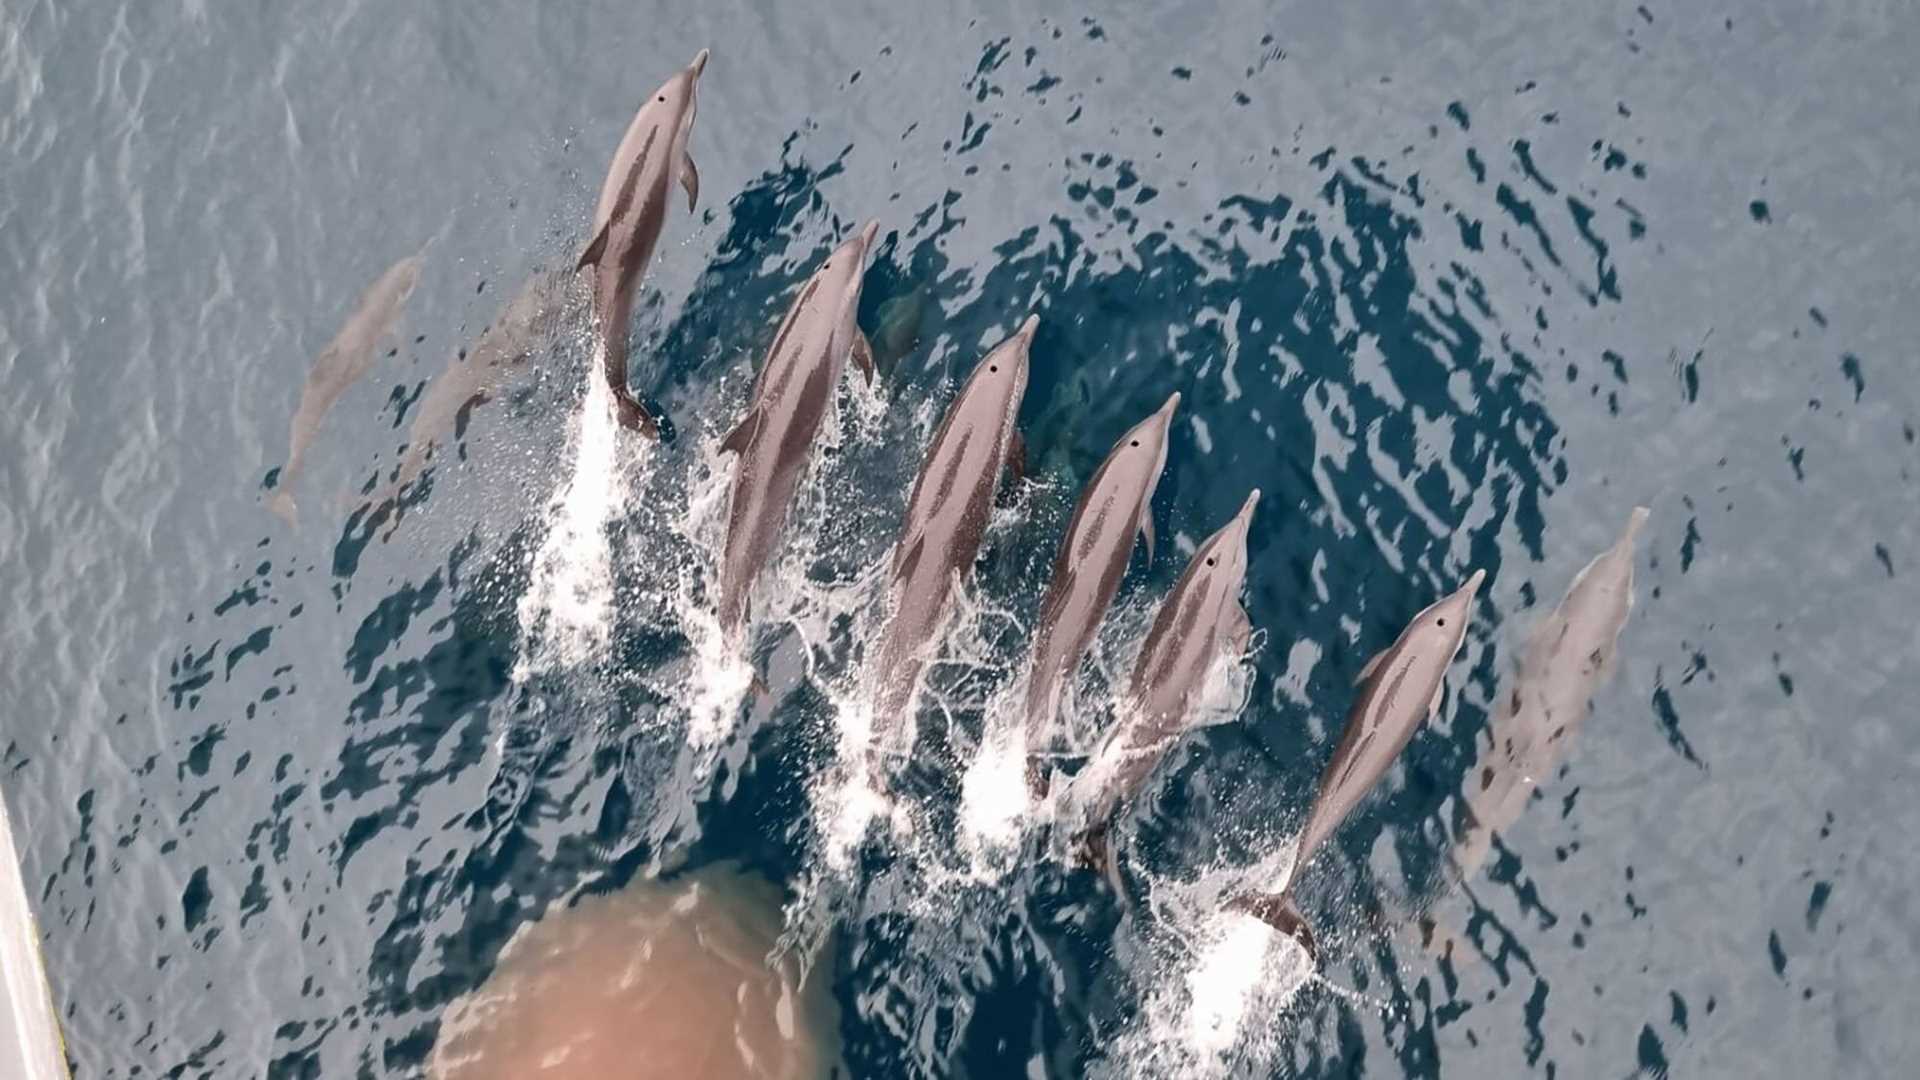 five dolphins